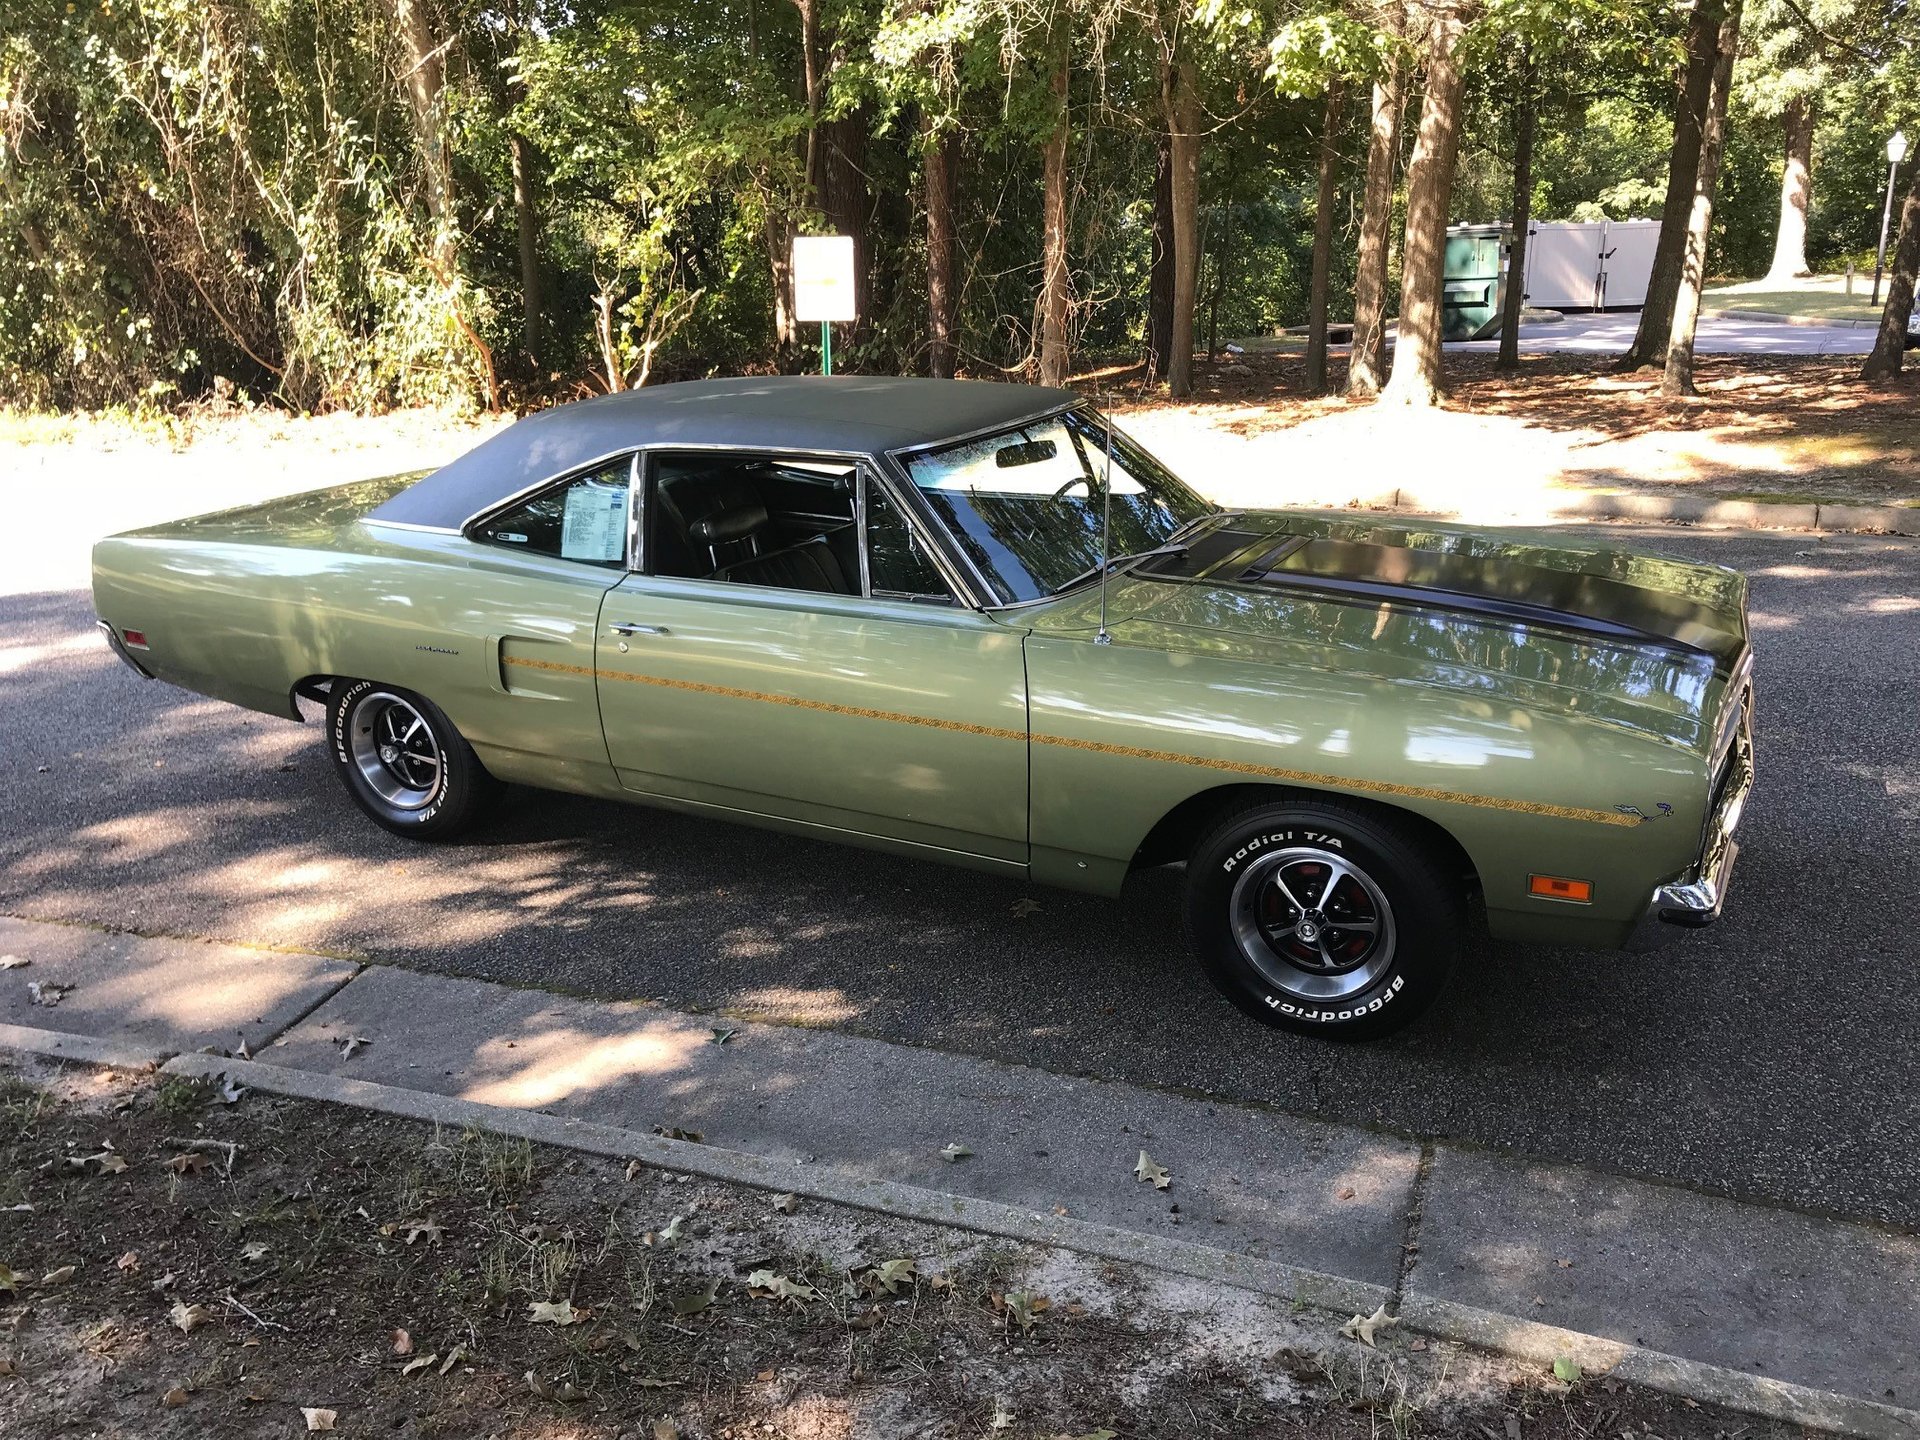 1970 plymouth road runner